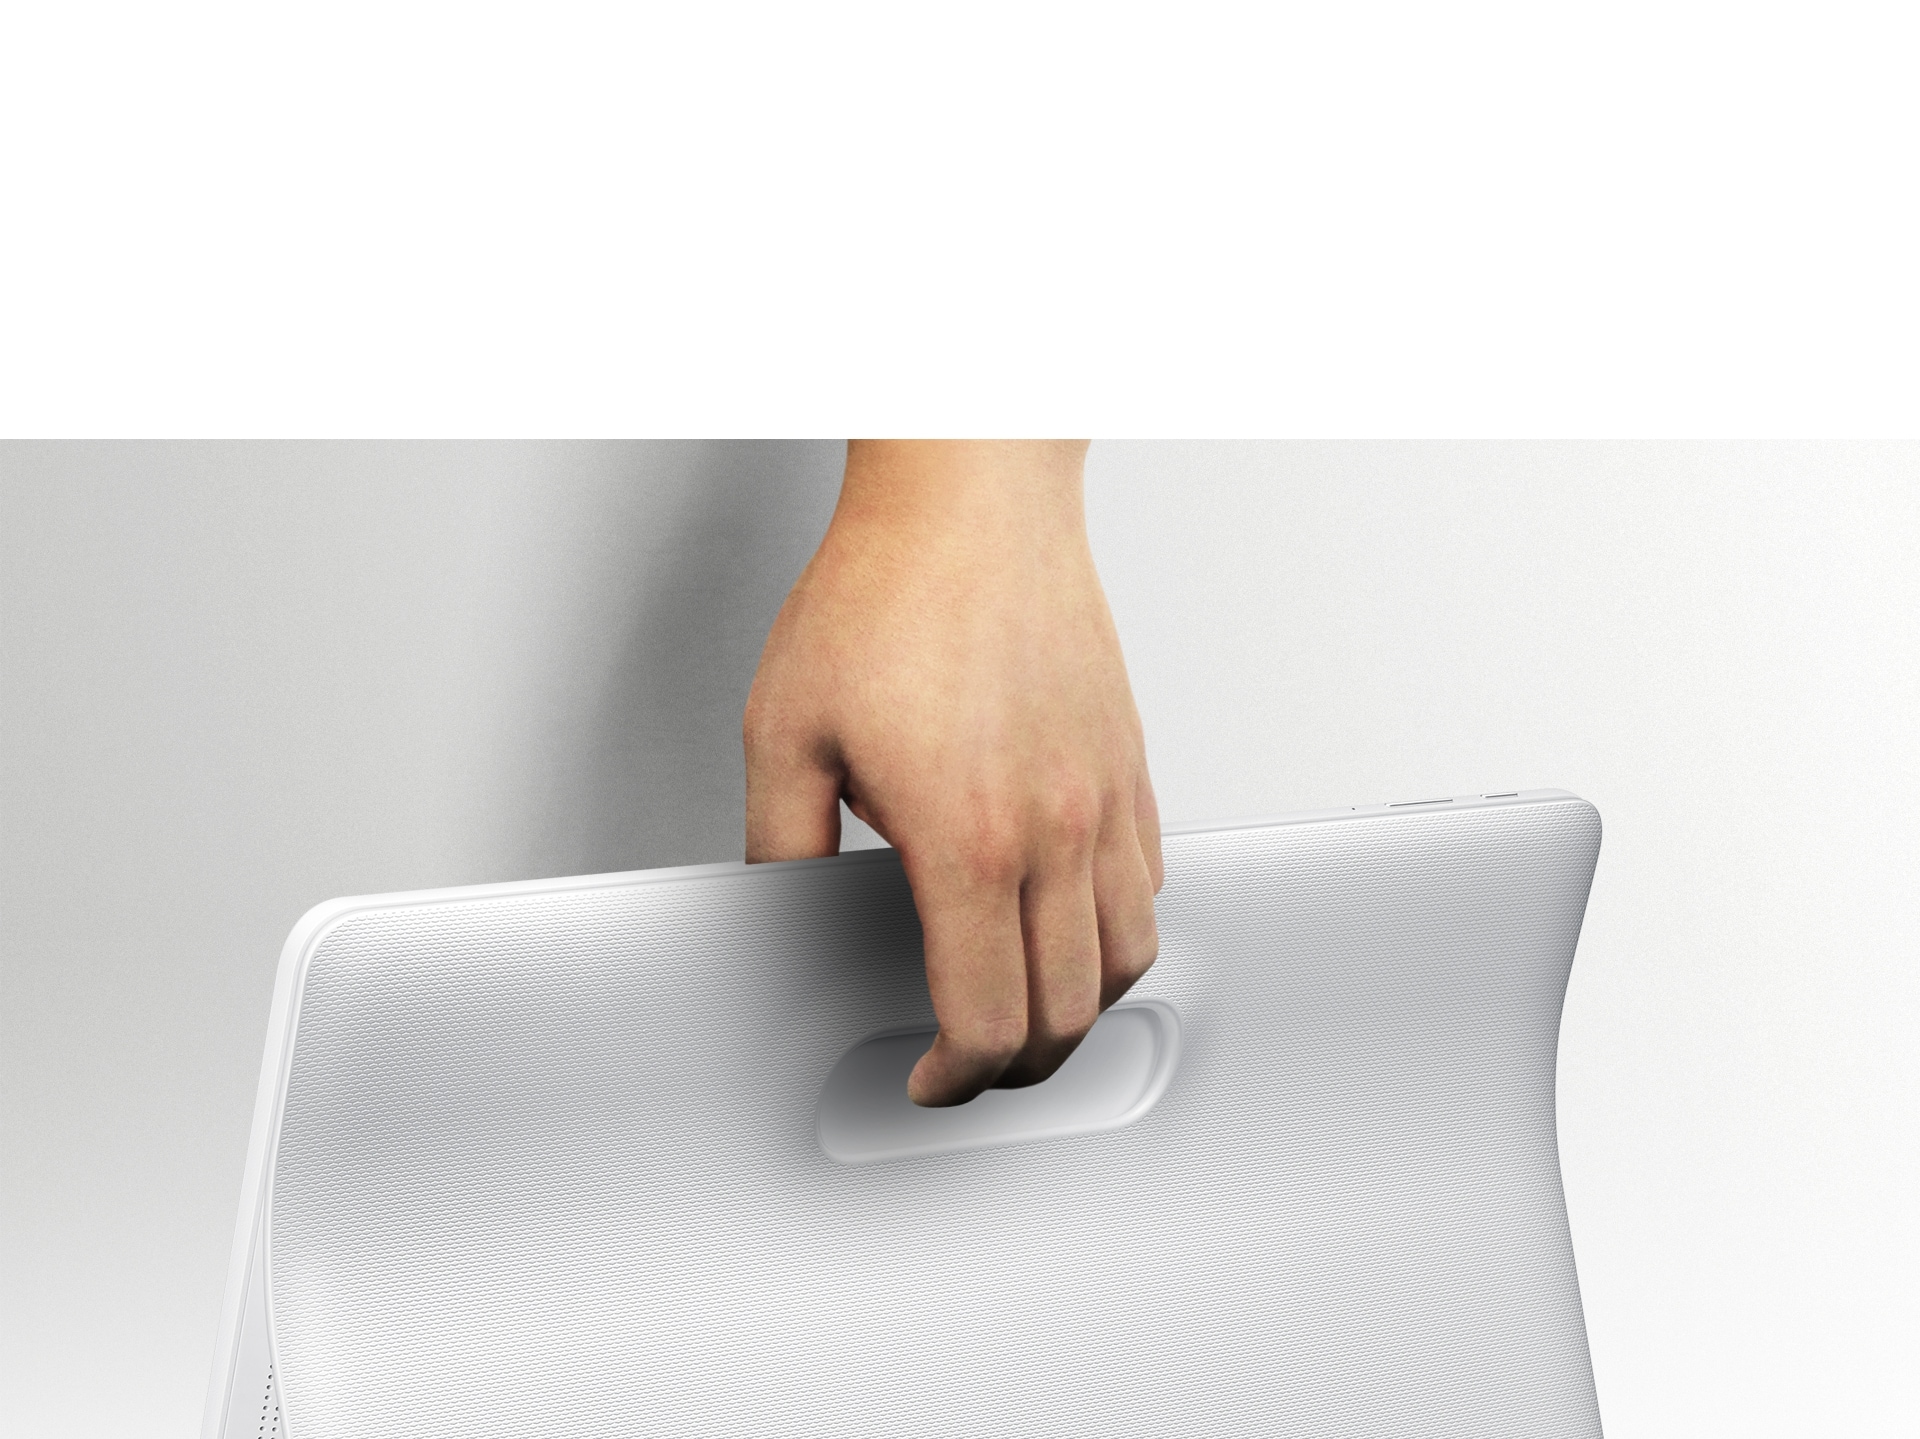 An image showing a user carrying a Galaxy View device using its rear handle.